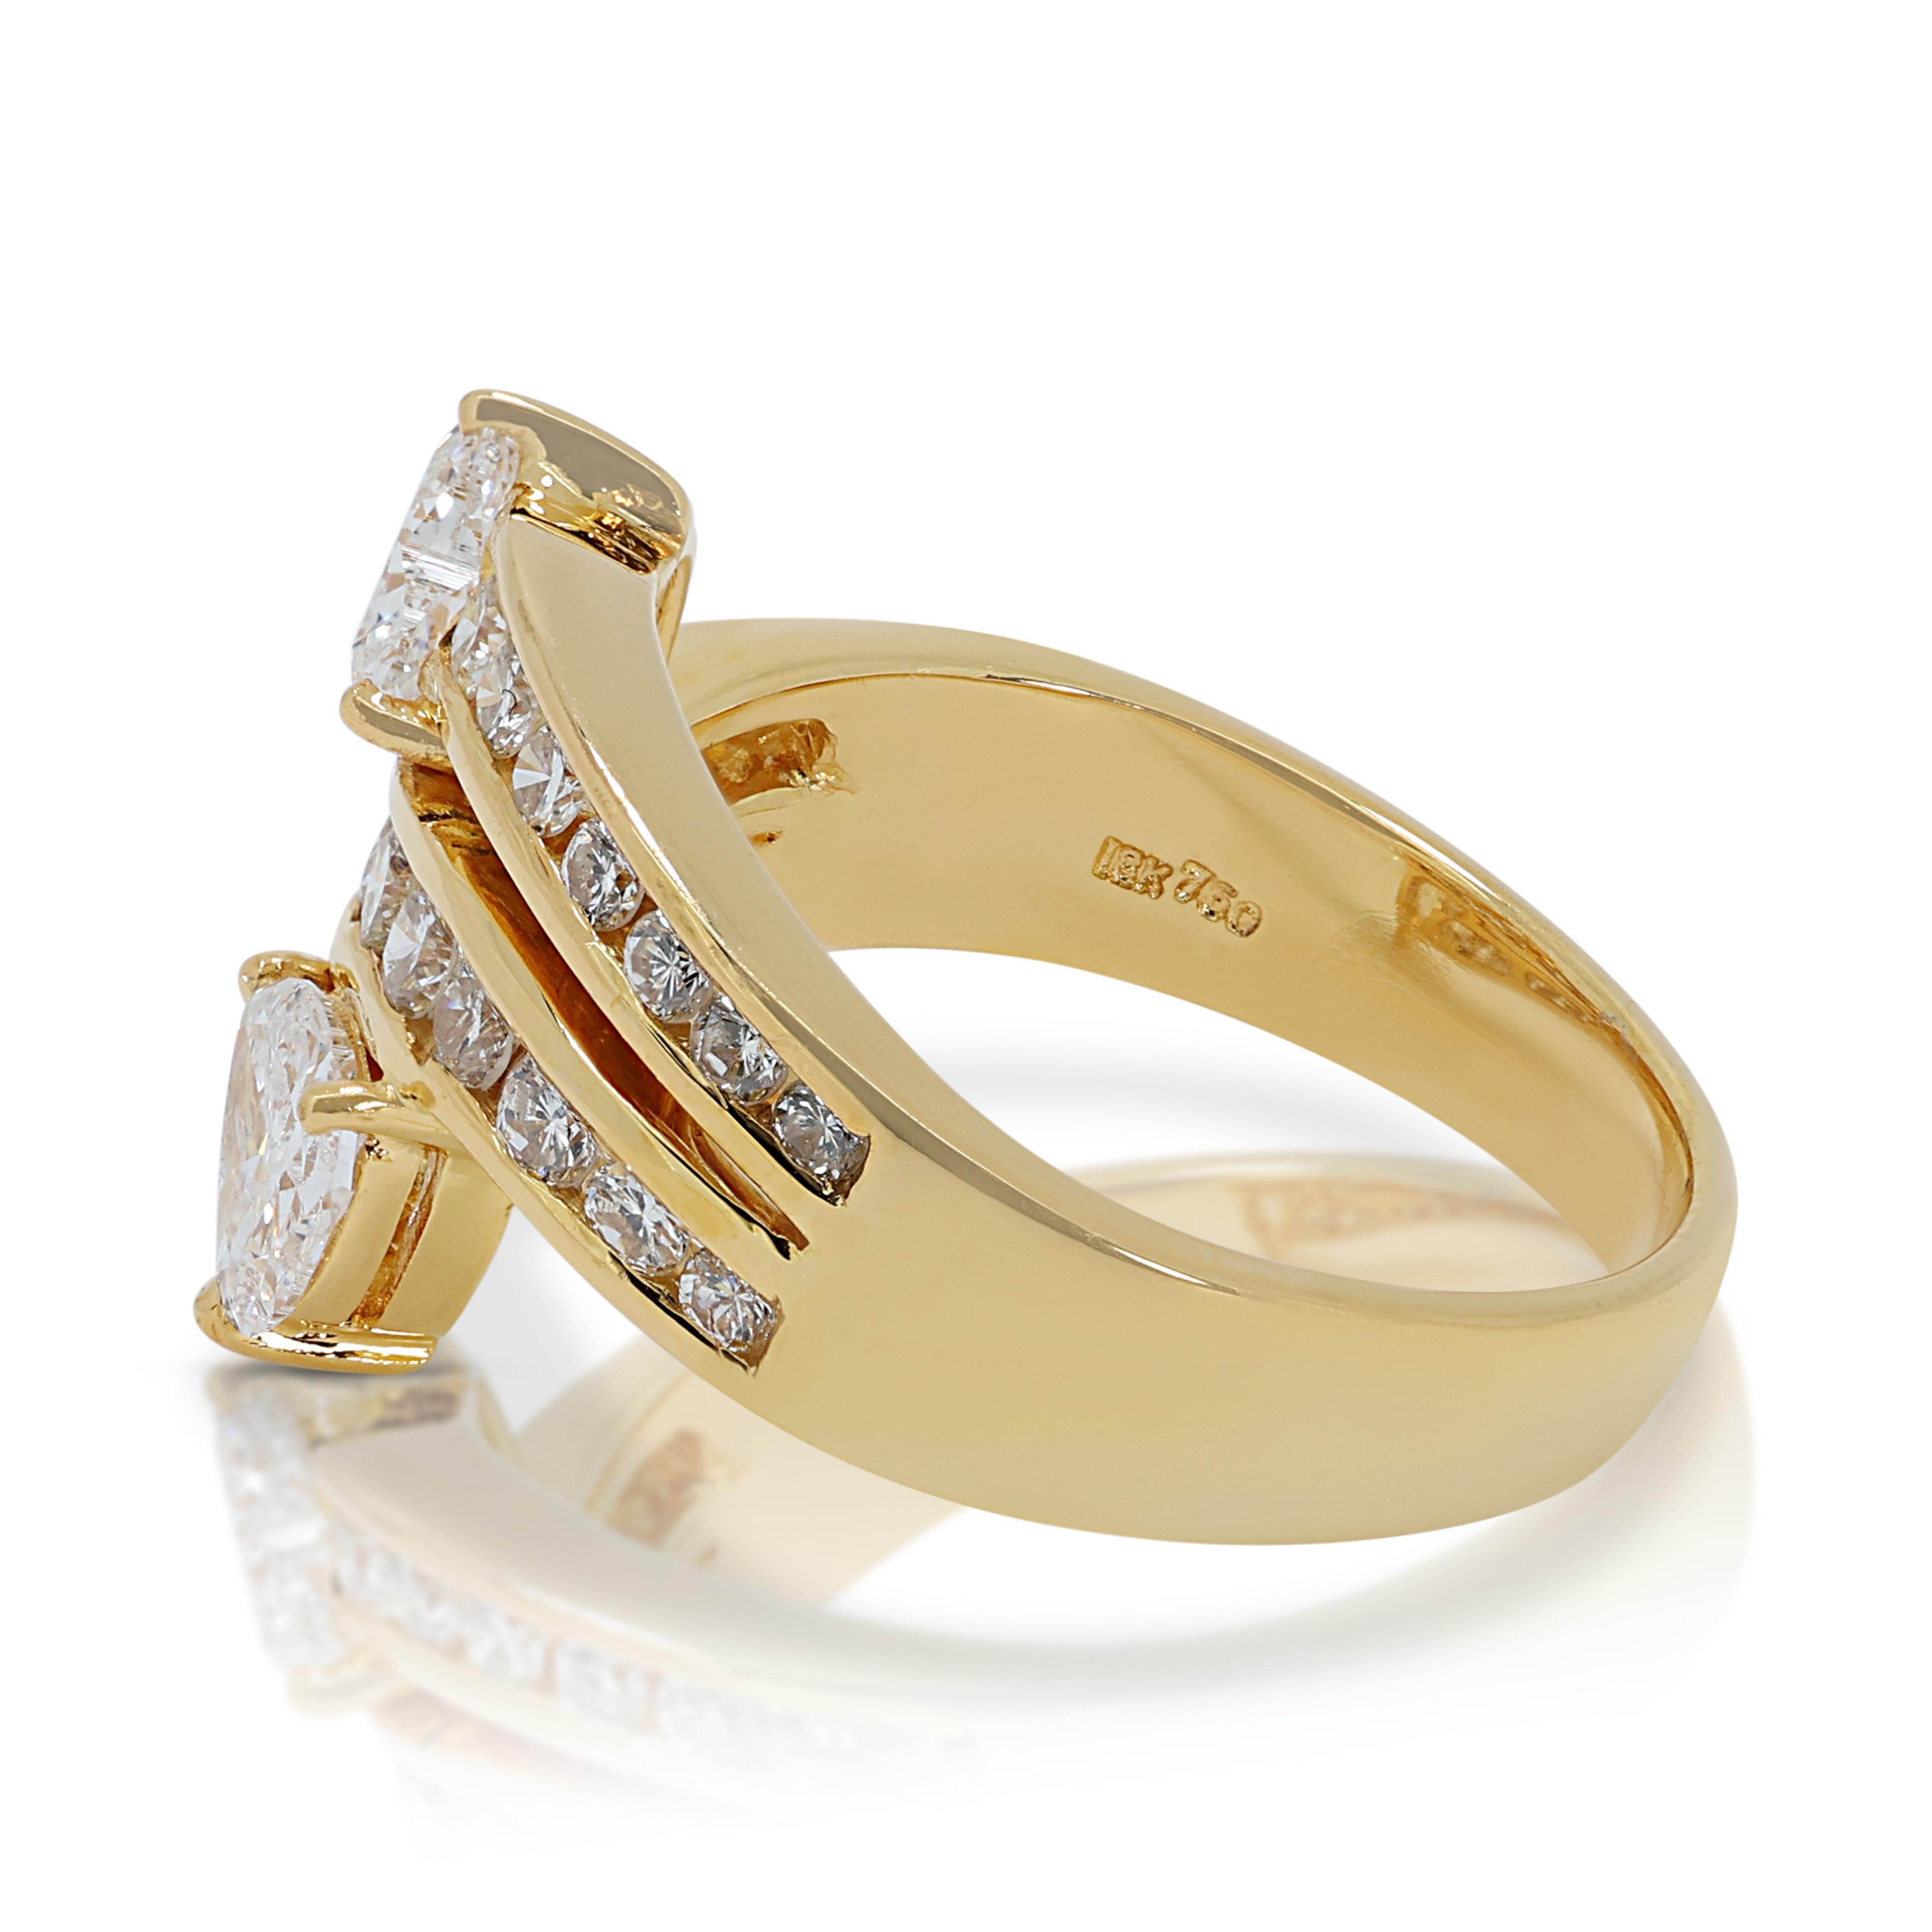 Women's Sophisticated 1.12ct Heart-Shaped Diamonds Cluster Ring in 18k Yellow Gold For Sale